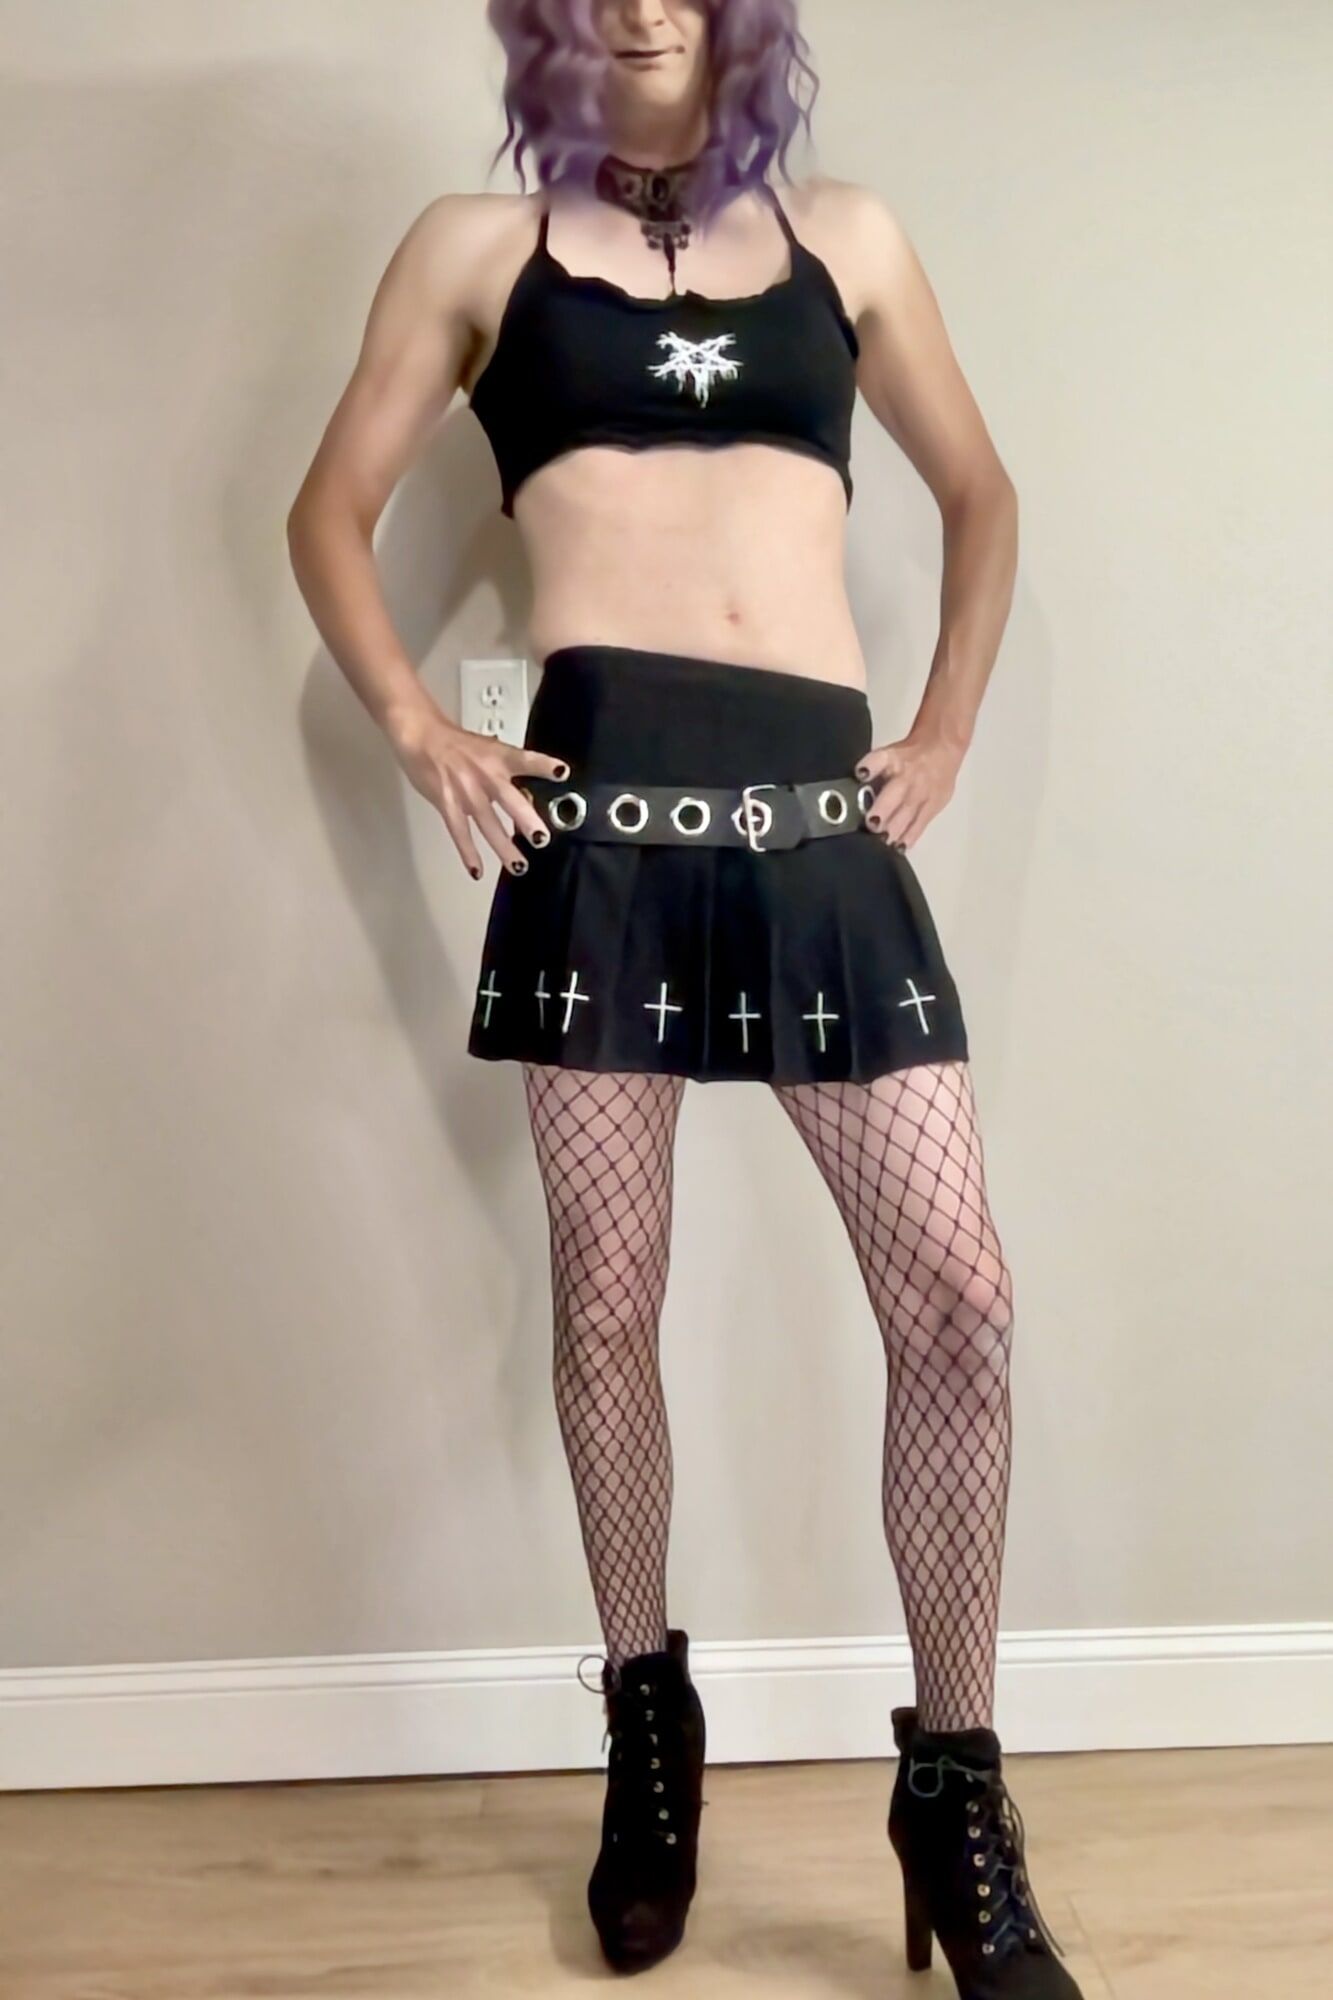 Can I be your goth slut?